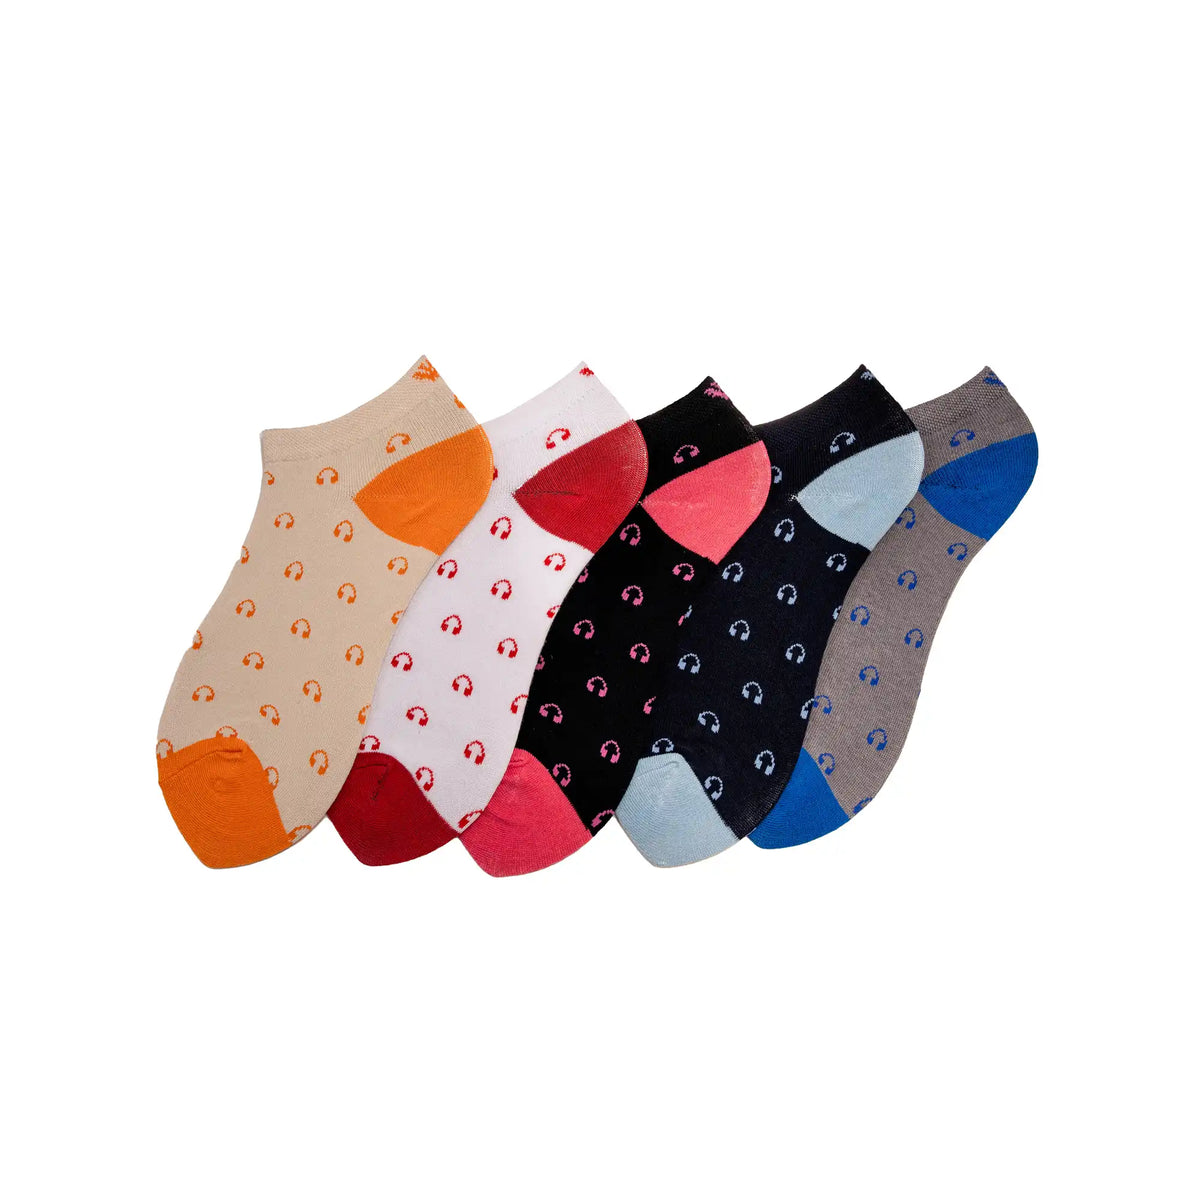 Young Wings Women's Multi Colour Cotton Fabric Design Low Ankle Length Socks - Pack of 5, Style no. 6106-W